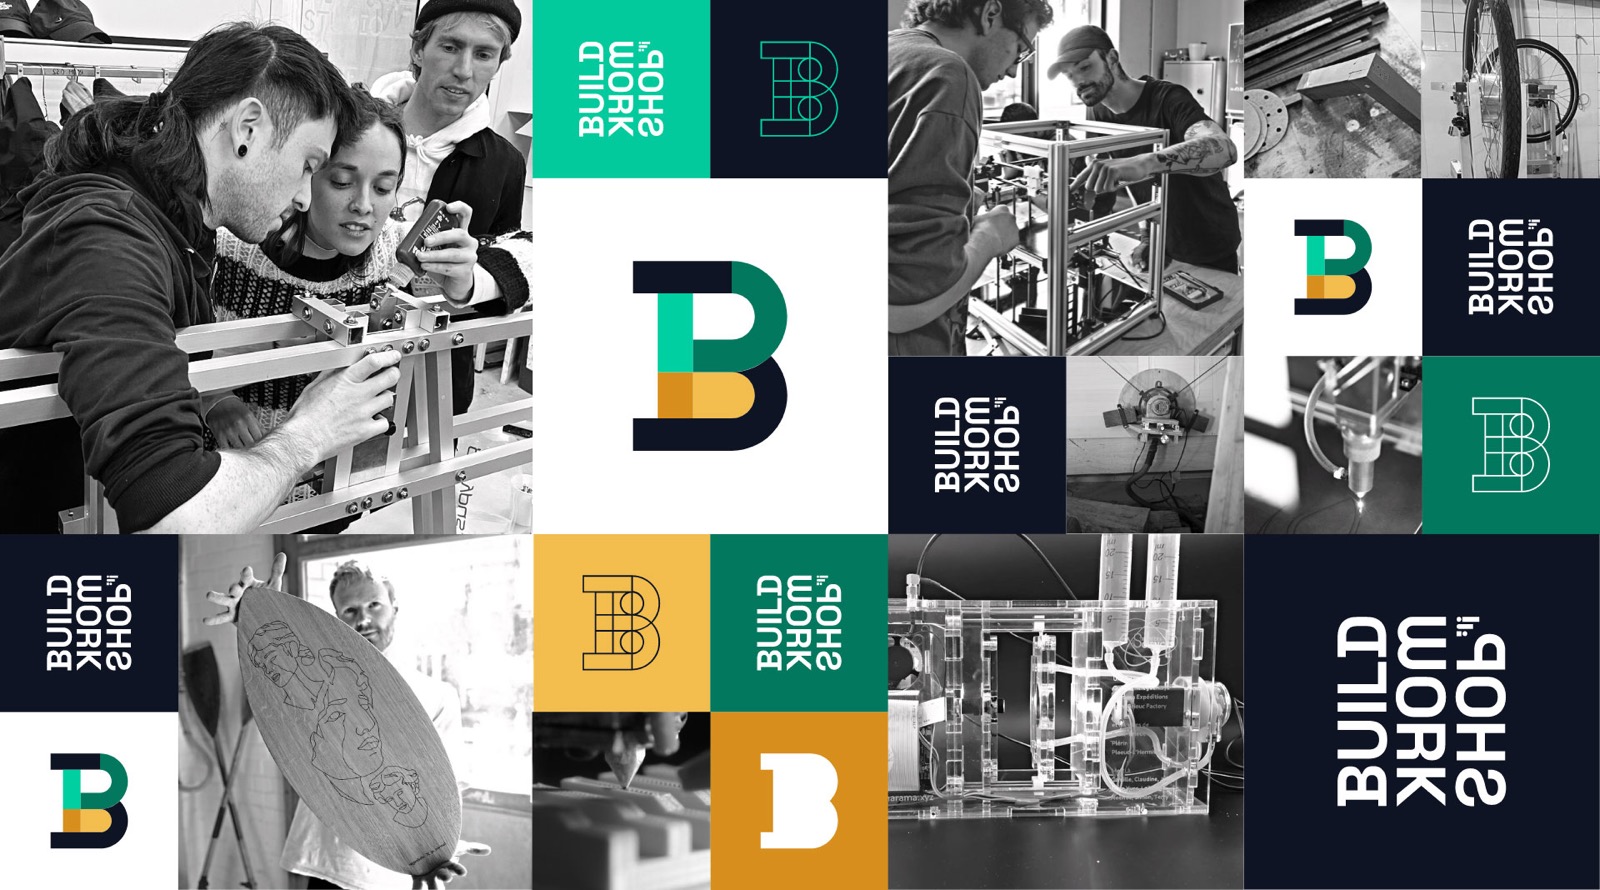 Build Workshop logo and photos of people at workshops with 3D printers, tools, balance board, electronics etc.